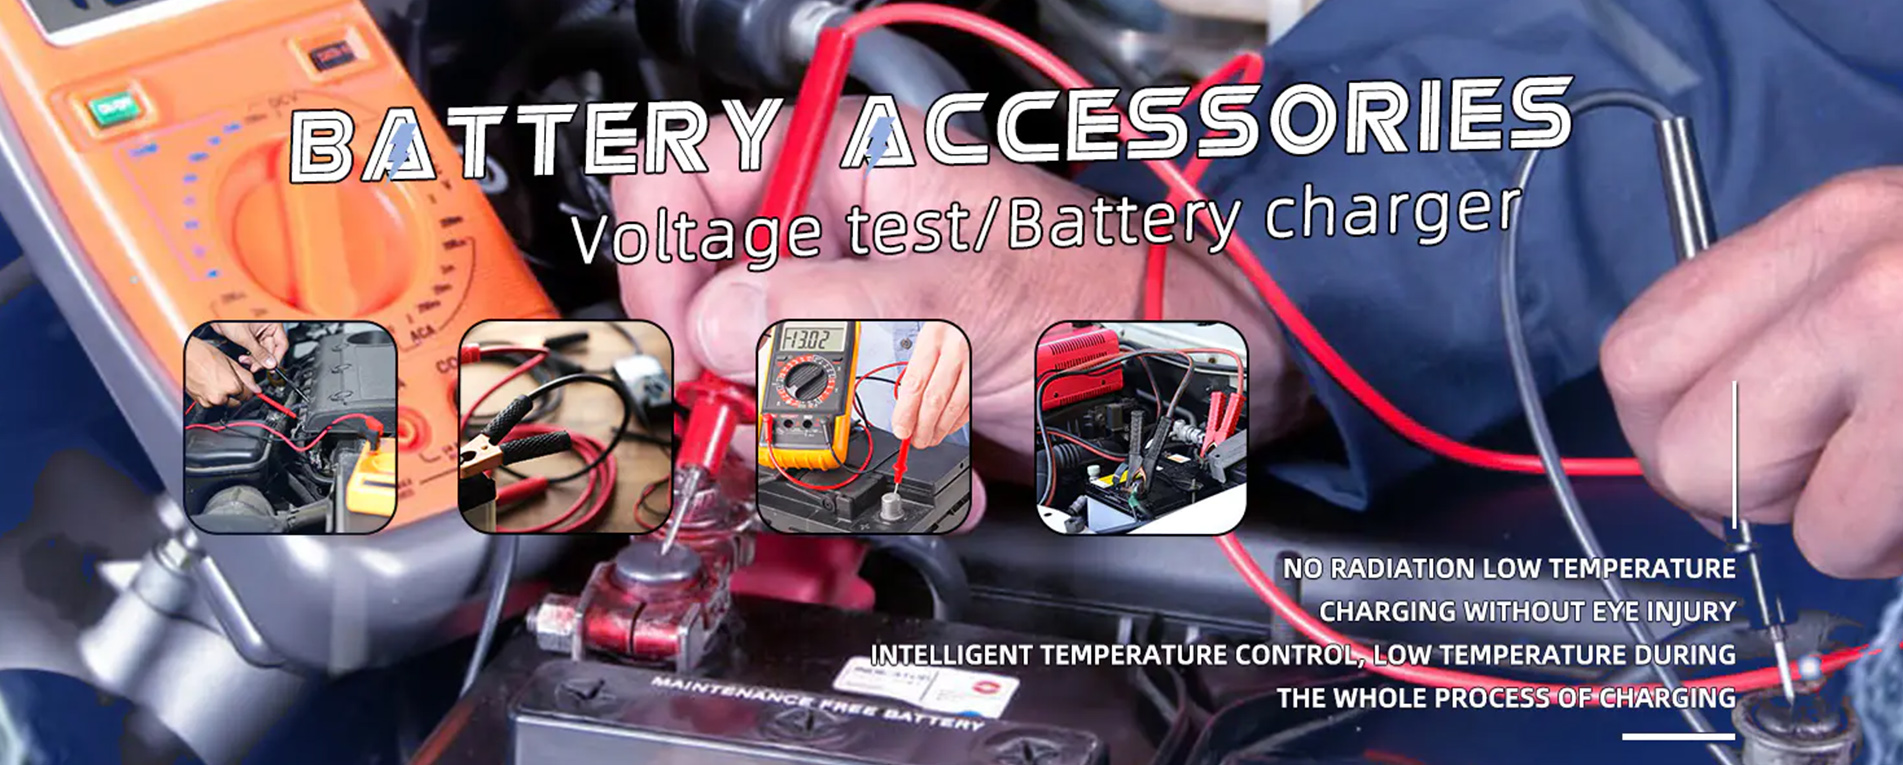 Battery Accessories Archives - VELA Battery